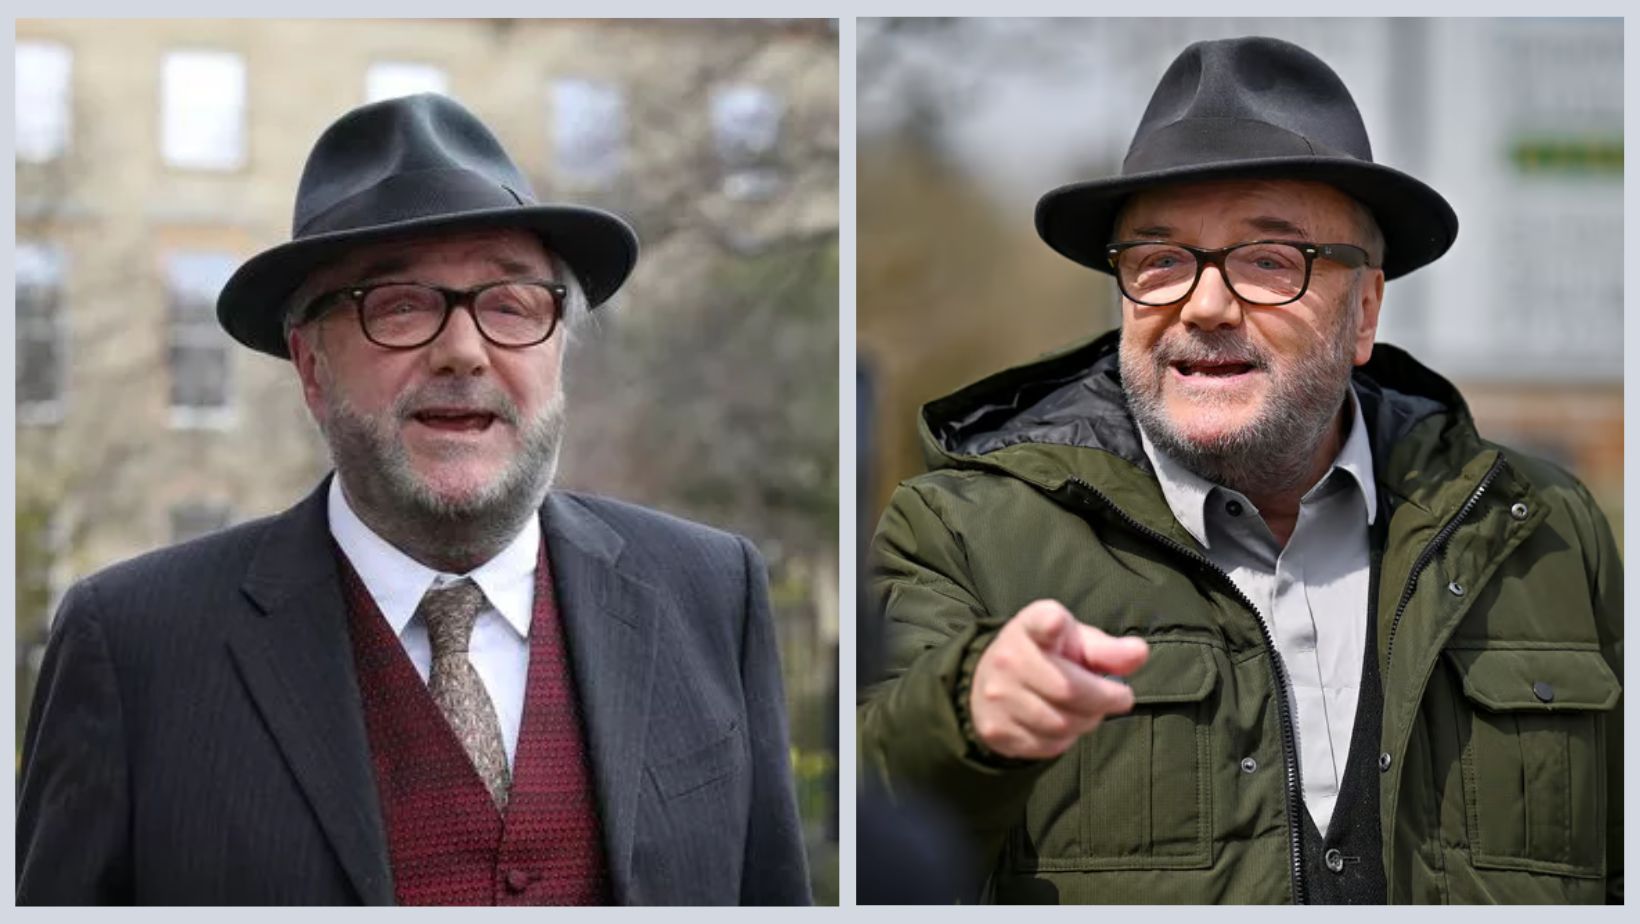 What Plastic Surgery Did George Galloway Undergo?